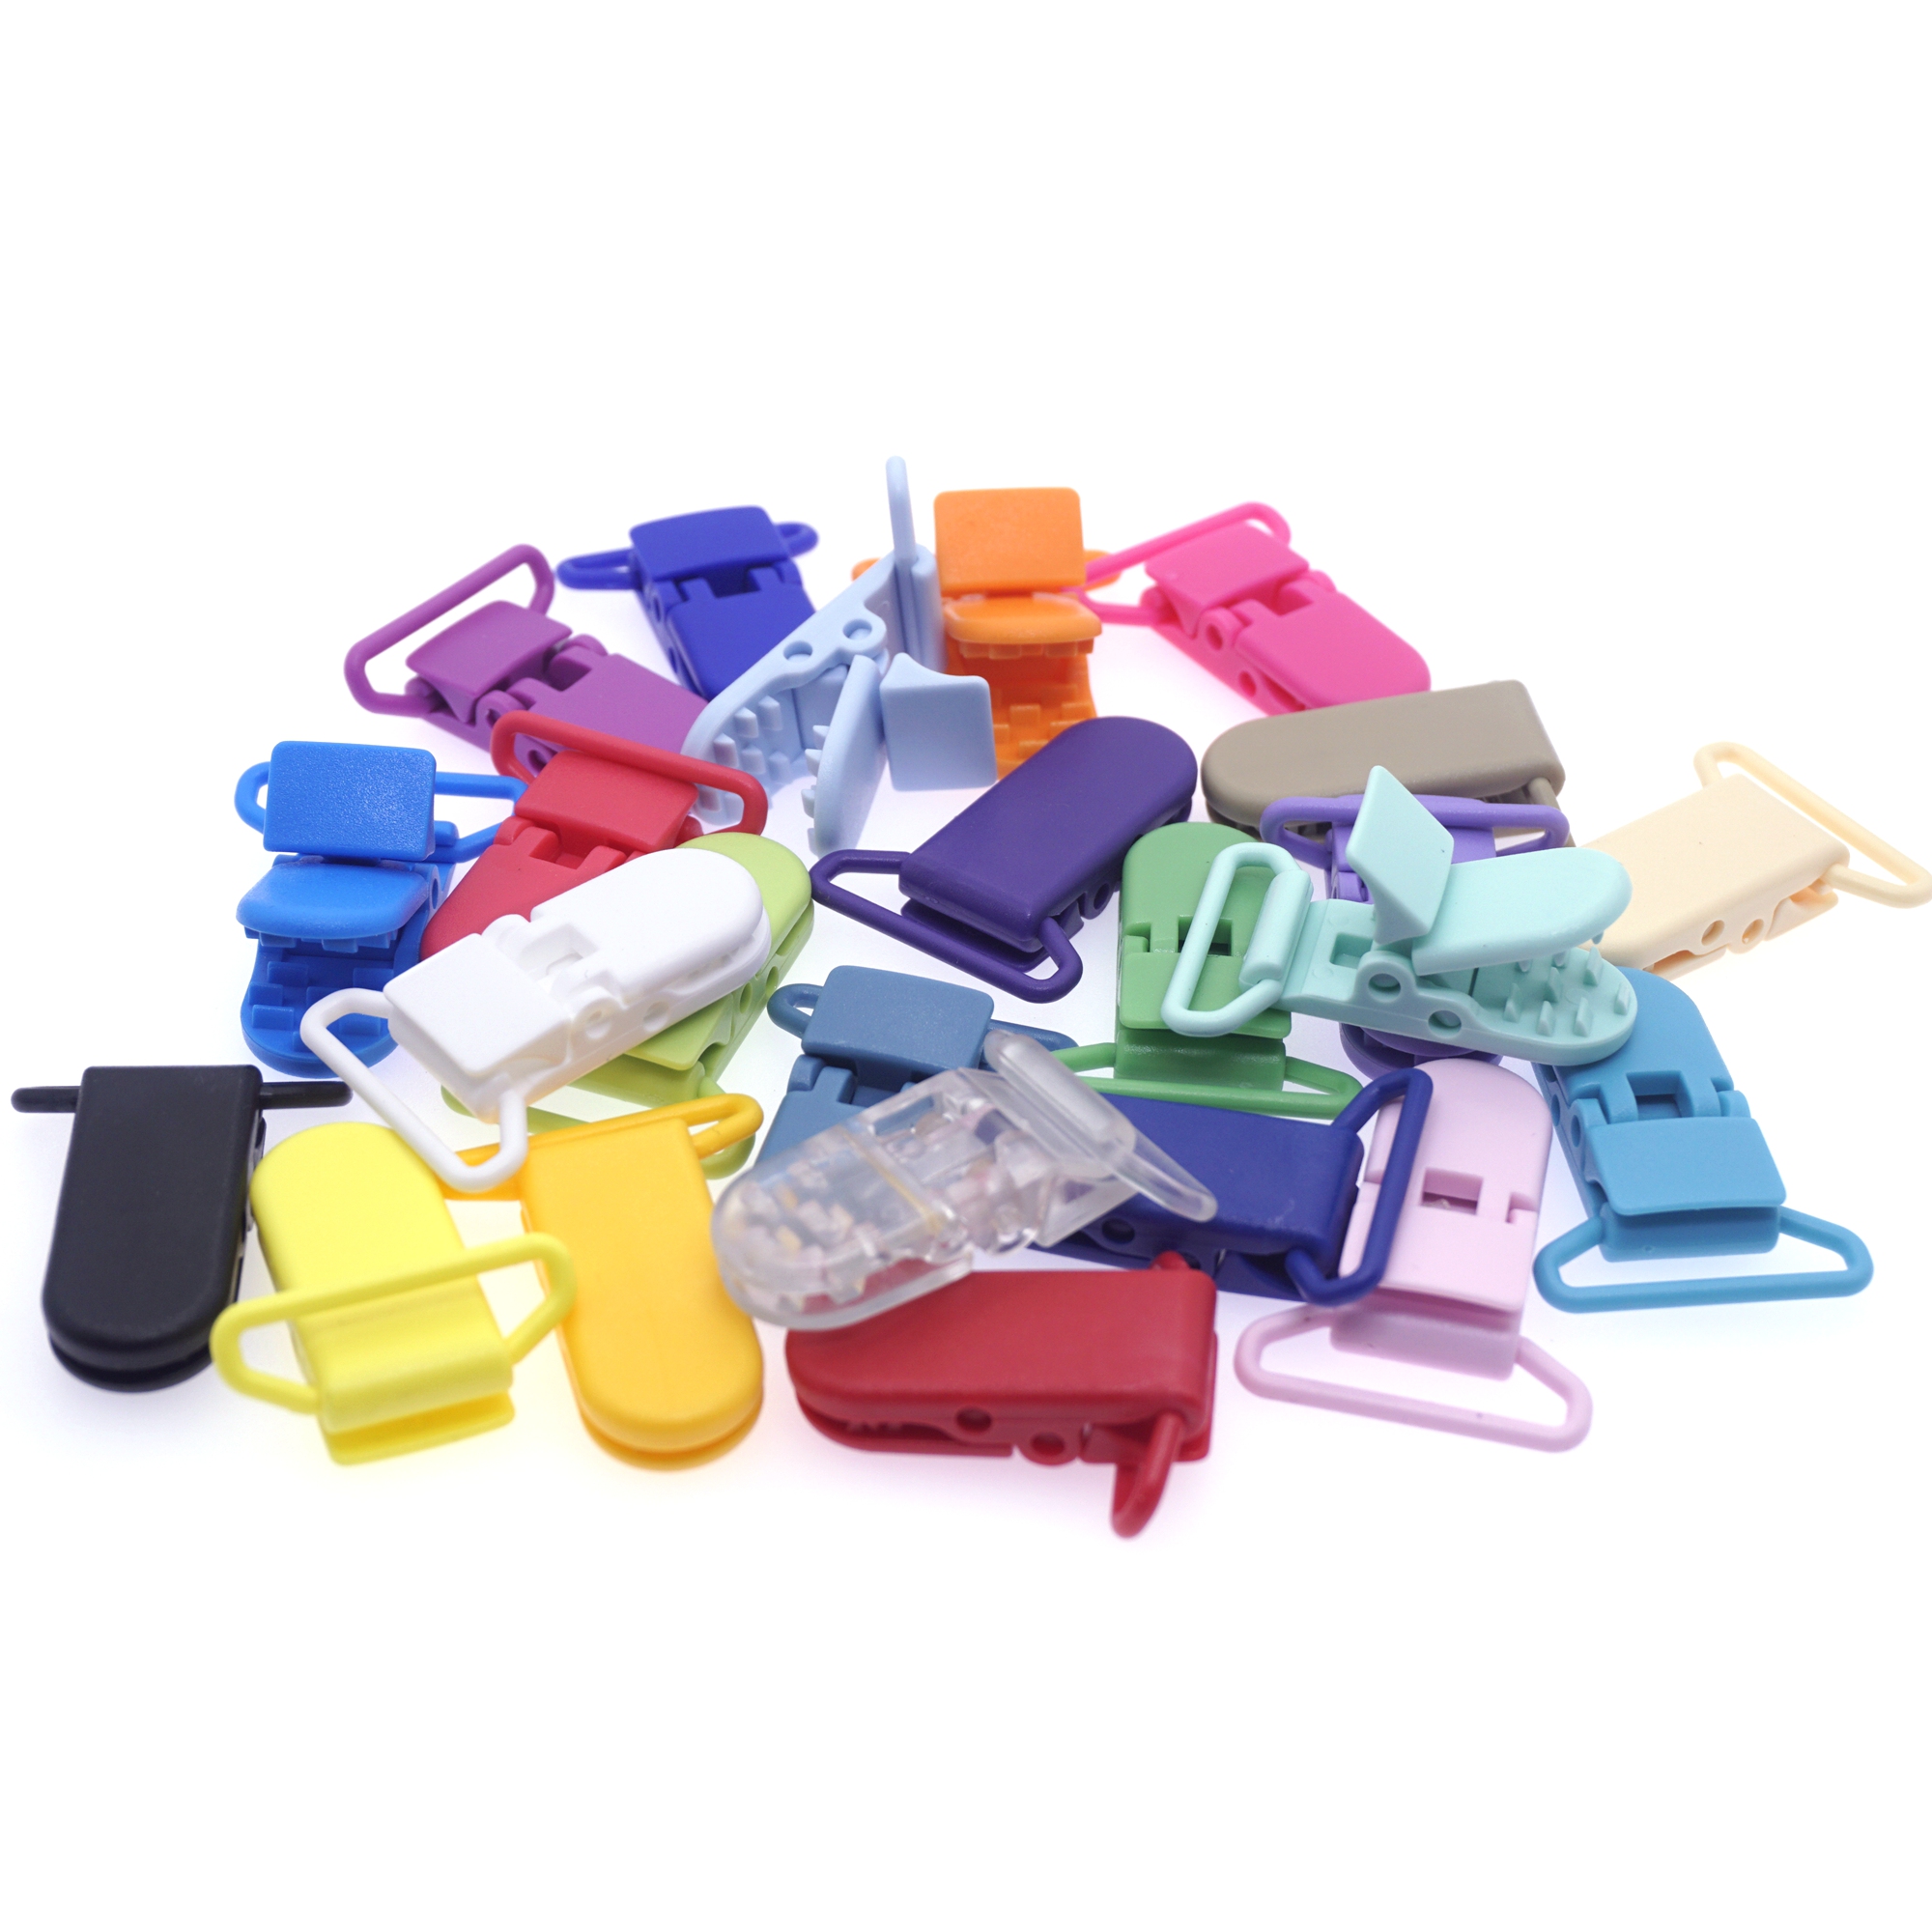 Sutoyuen 25mm 1 '' Kam Plastic Garment Binder Suspender Clips Baby Pacifier Mam Dummy Soother Cother Holder Clips 20色